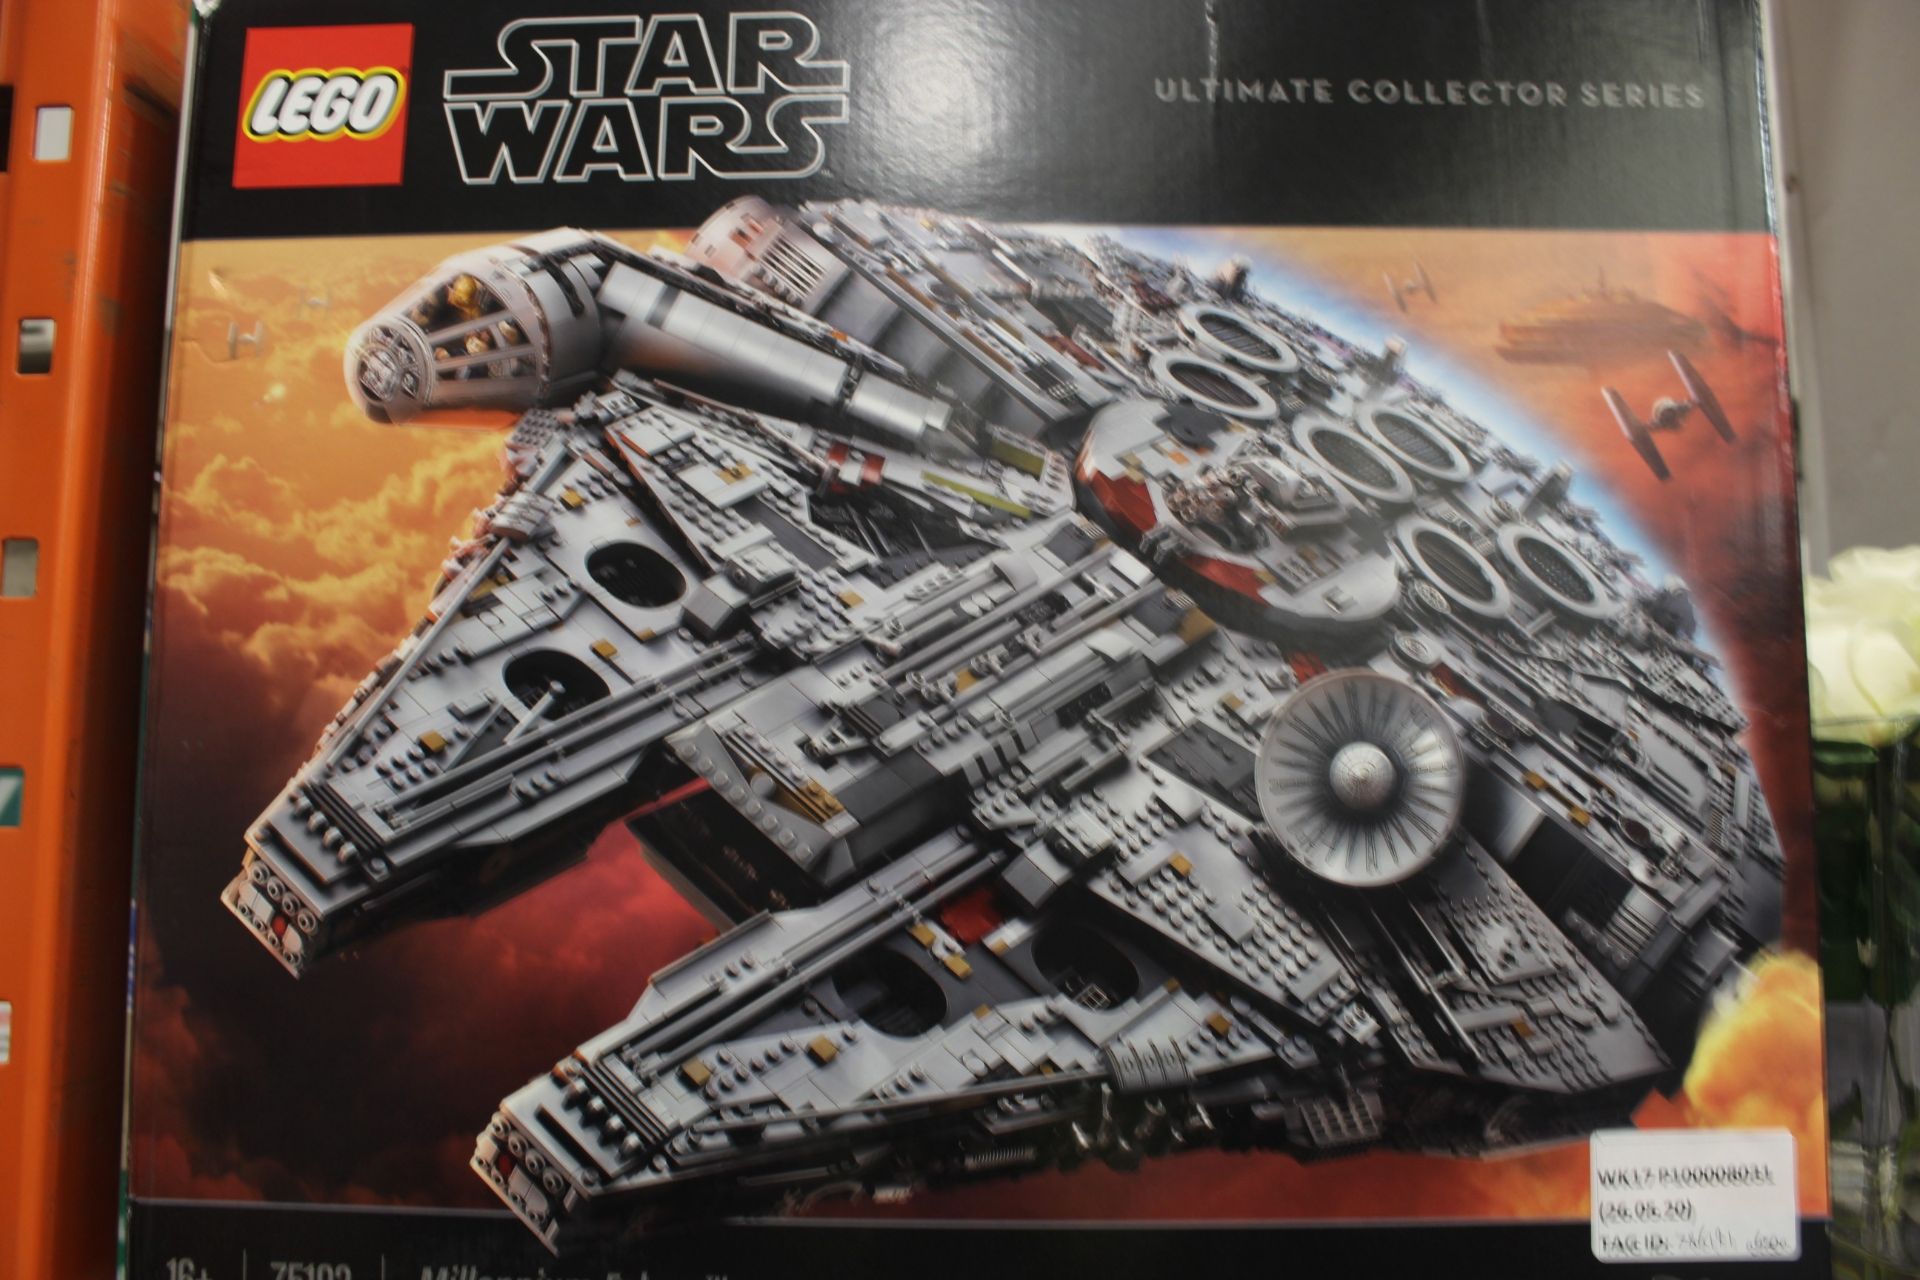 Boxed Lego Star Wars Ultimate Collection Series Mi